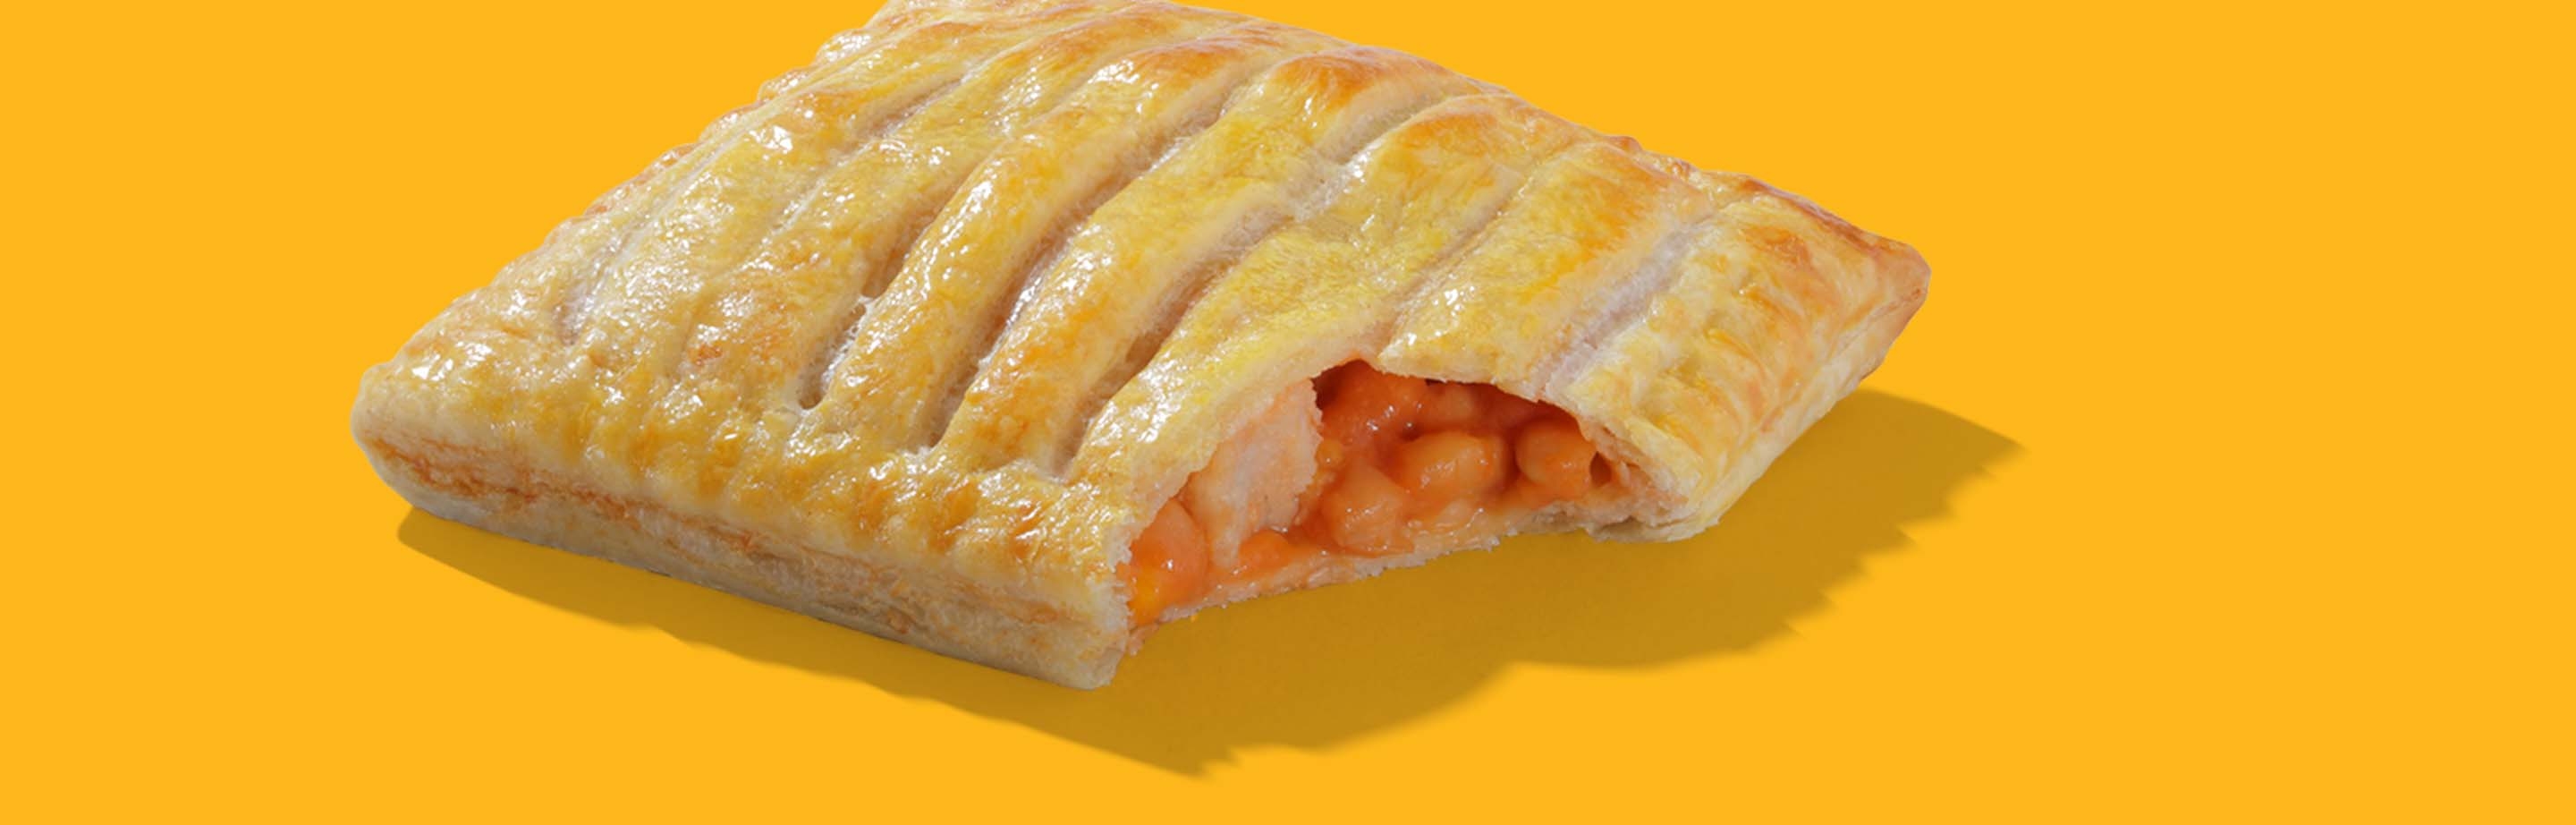 A Greggs Sausage, Bean and Cheese Melt